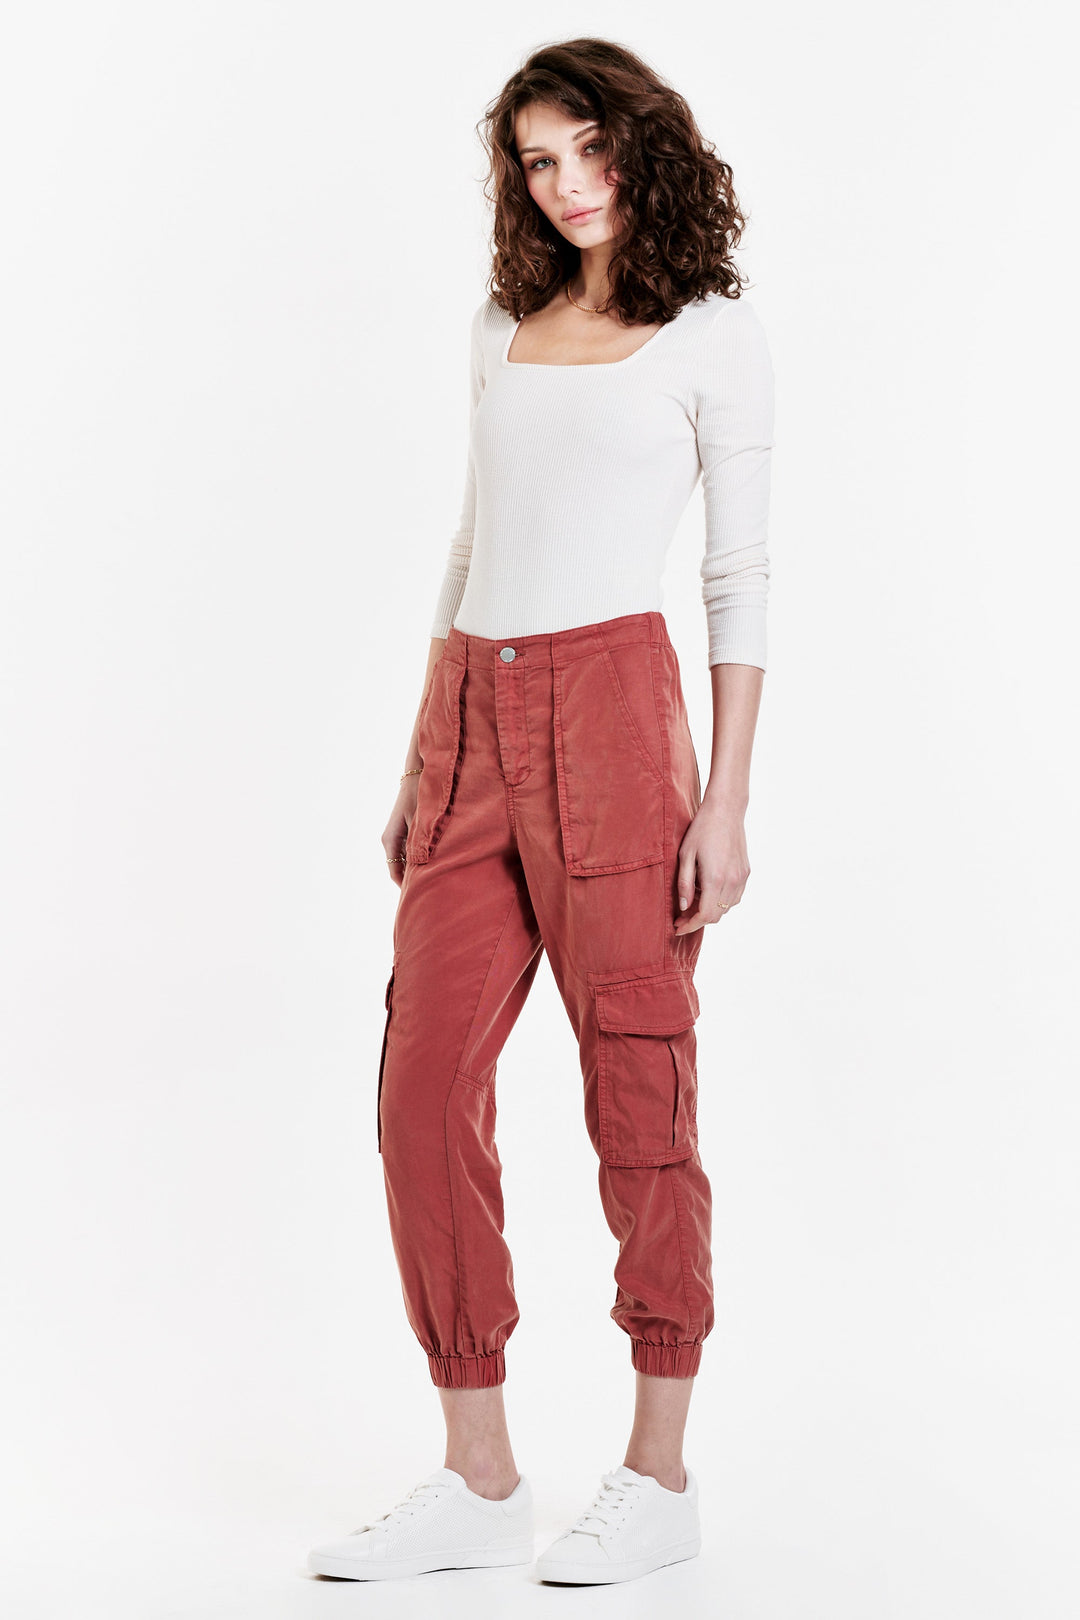 image of a female model wearing a SANDY SUPER HIGH RISE ANKLE TROUSER PANTS POTTERS CLAY PANTS